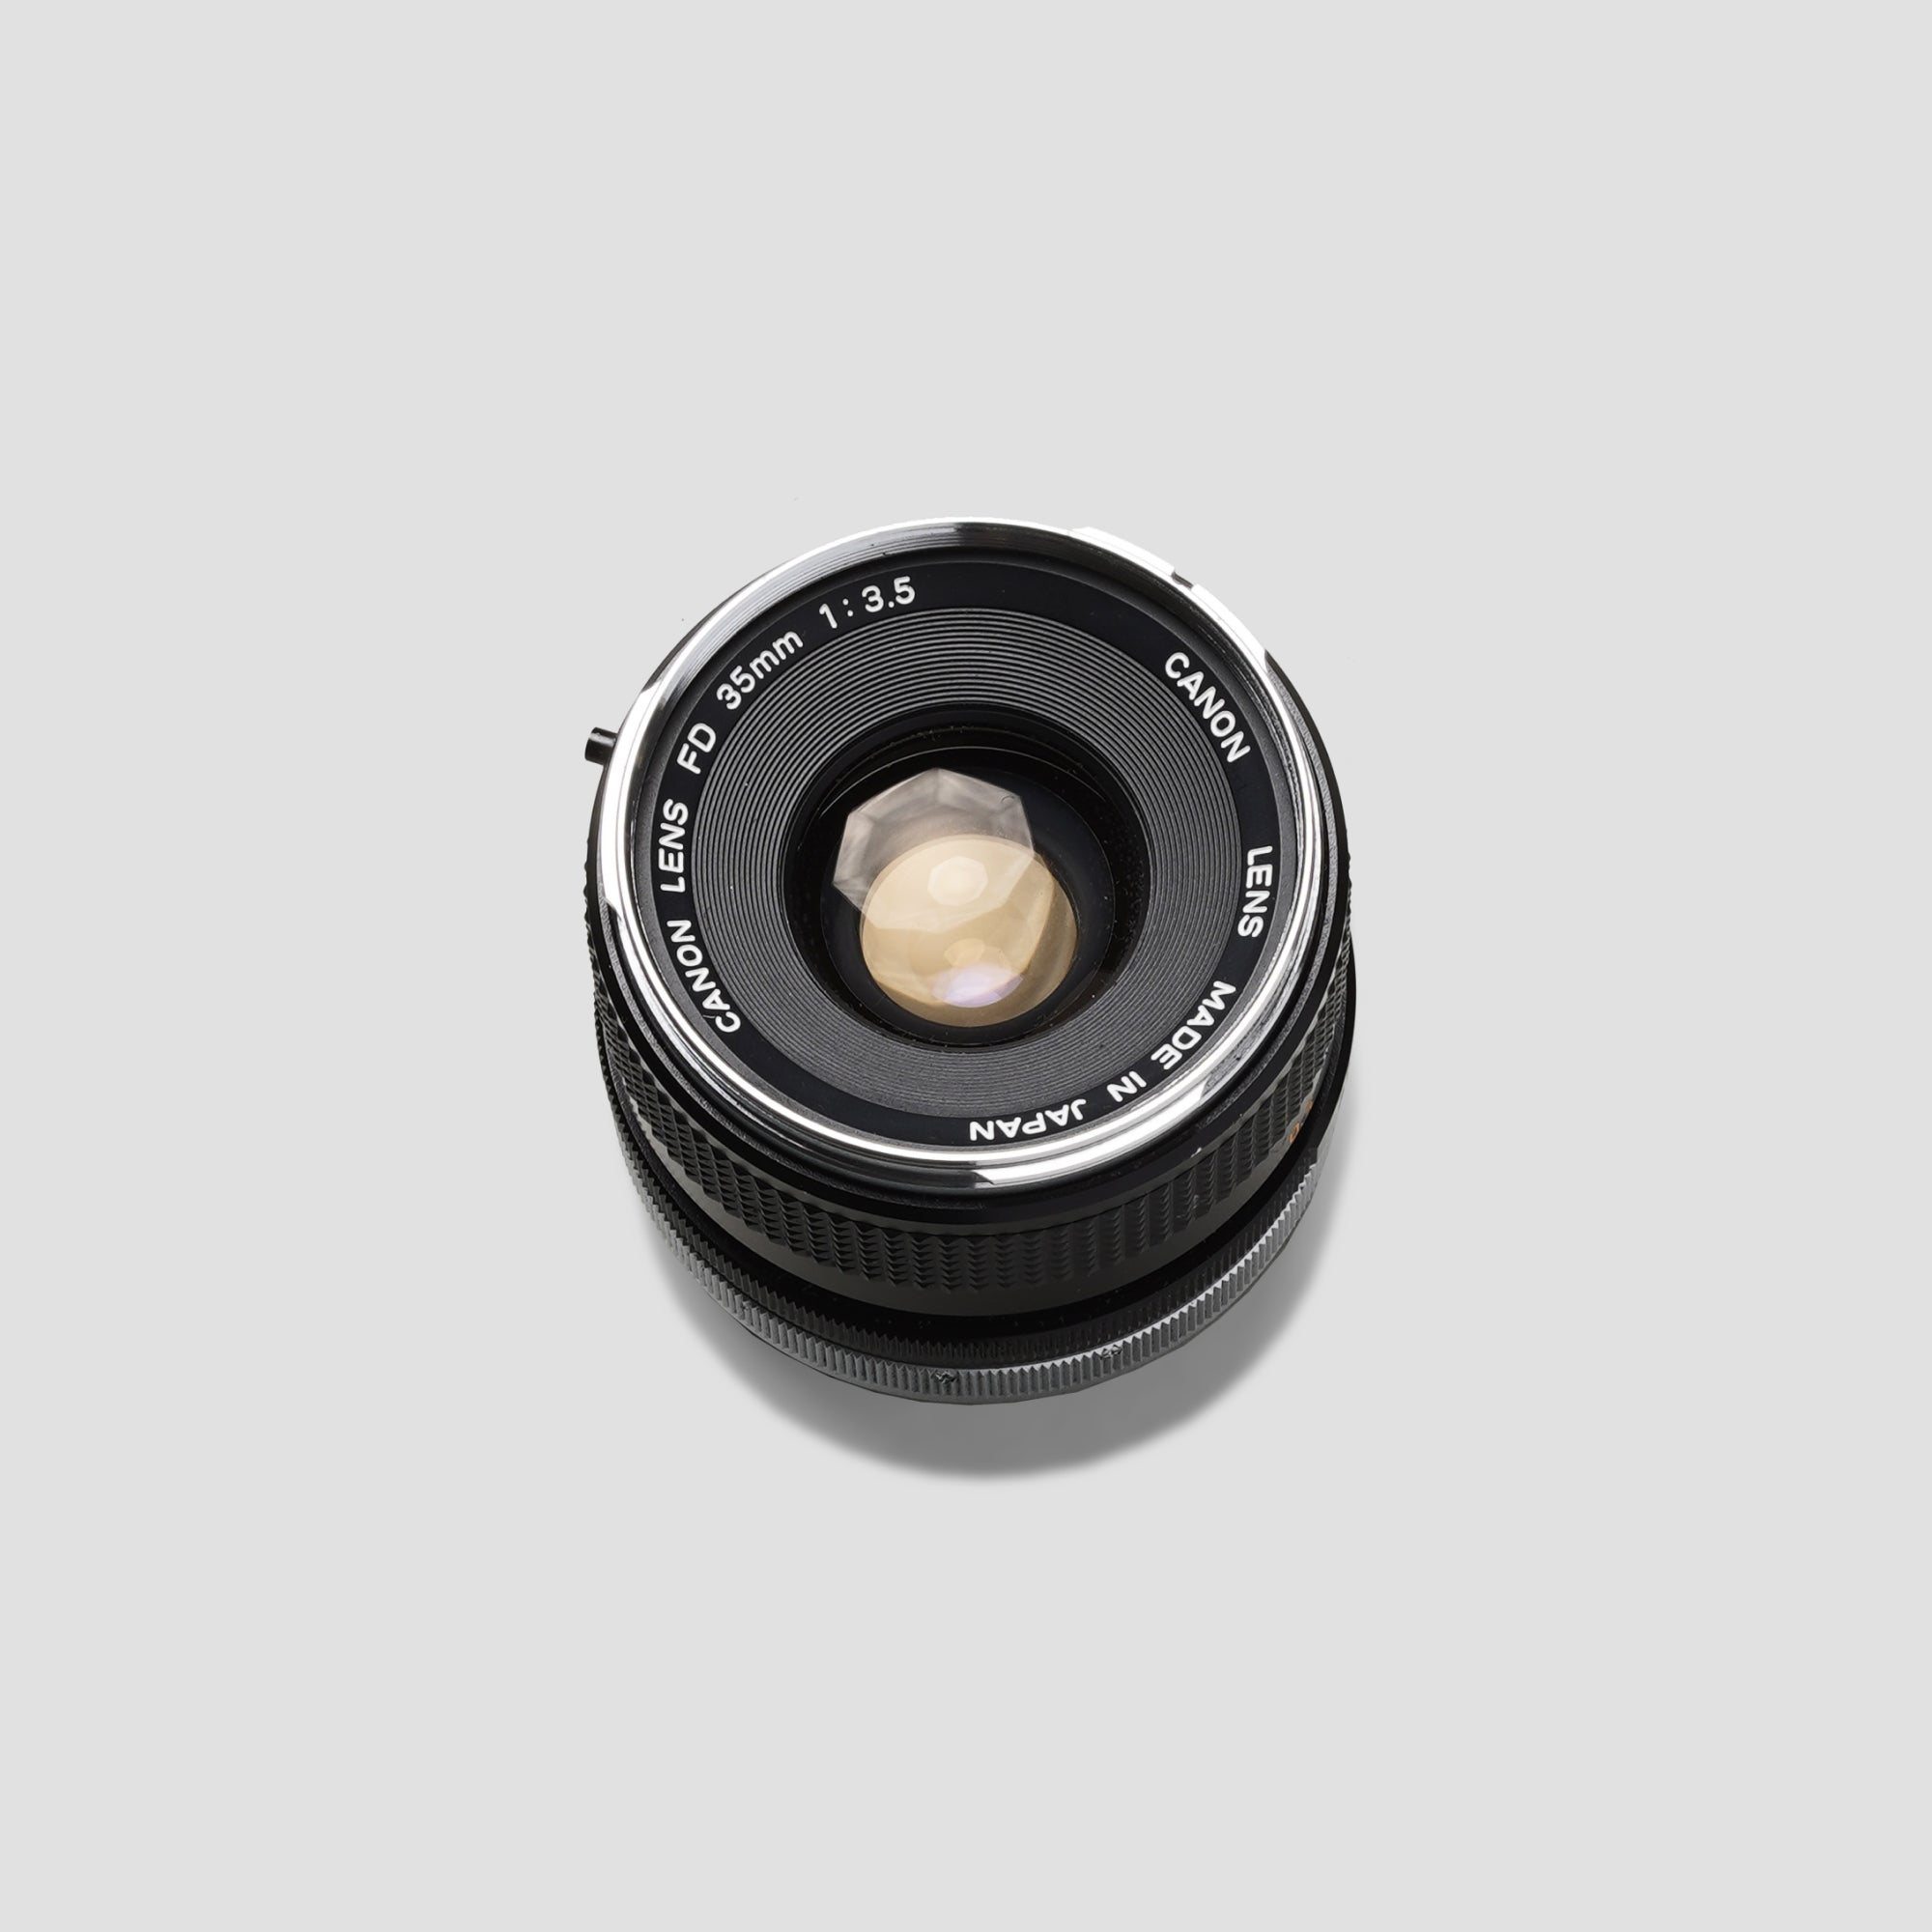 Buy Canon FD 35mm 3.5 (Chrome Nose) now at Analogue Amsterdam